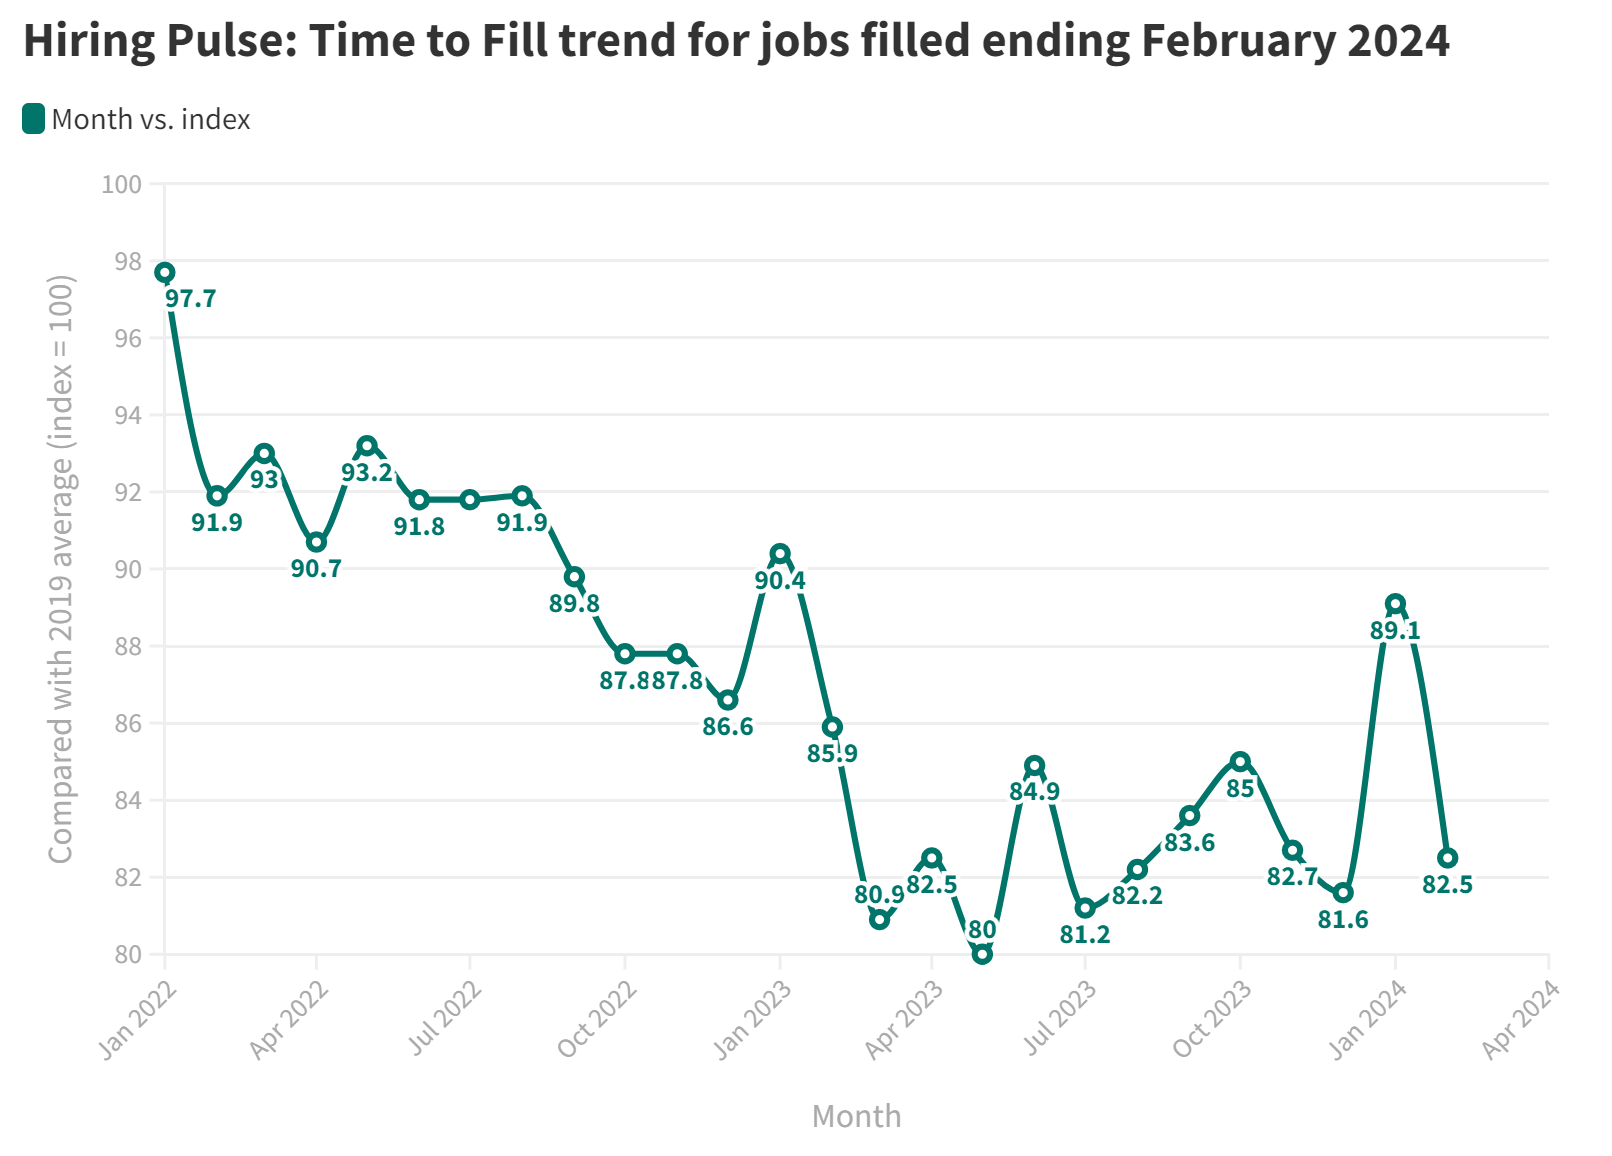 Line graph titled "Hiring Pulse: Time to Fill trend for jobs filled ending February 2024" shows monthly index values from April 2022 to February 2024, fluctuating between 83.3 (Feb 2023) and 97.7 (Apr 2022), peaking again at 89.1 in January 2024, highlighting the need for efficient recruitment strategies